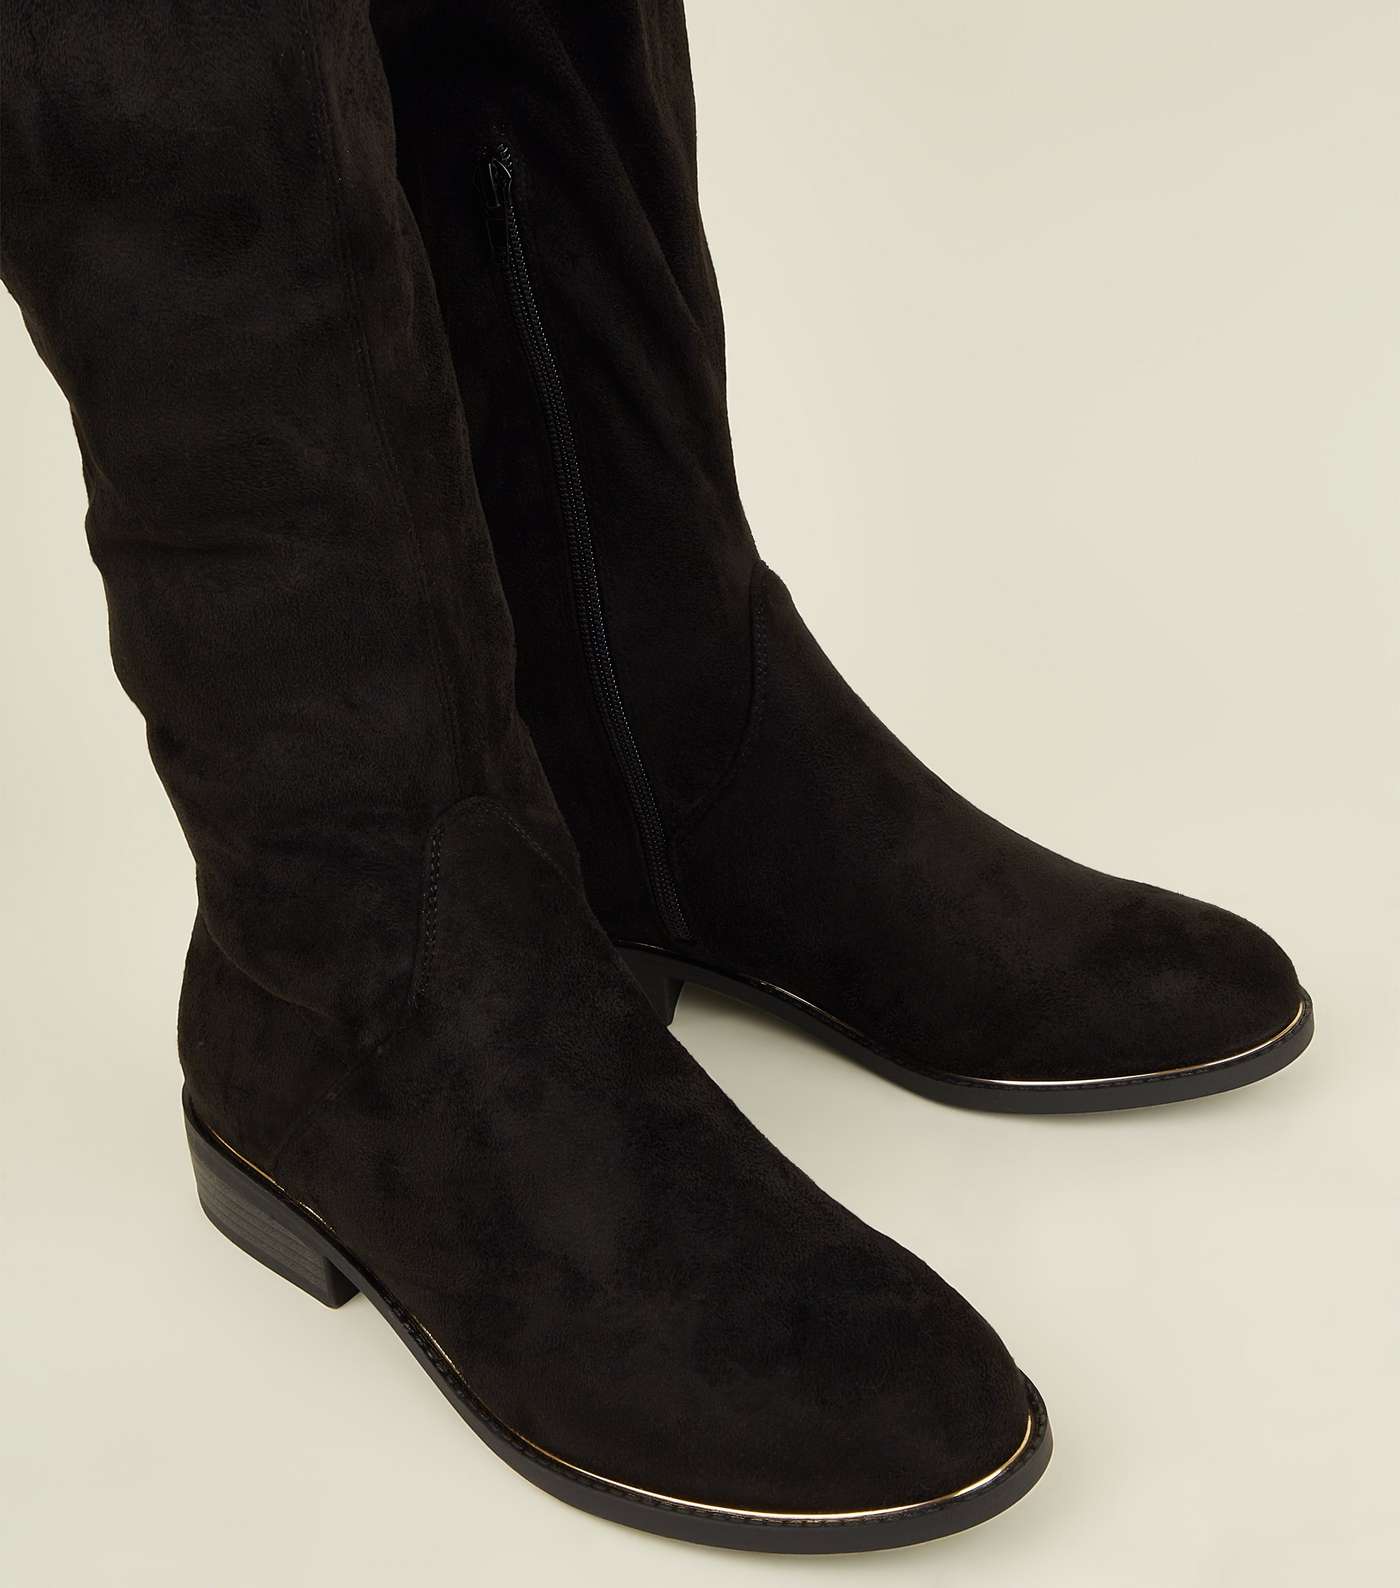 Black Suedette Flat Over the Knee Boots Image 4